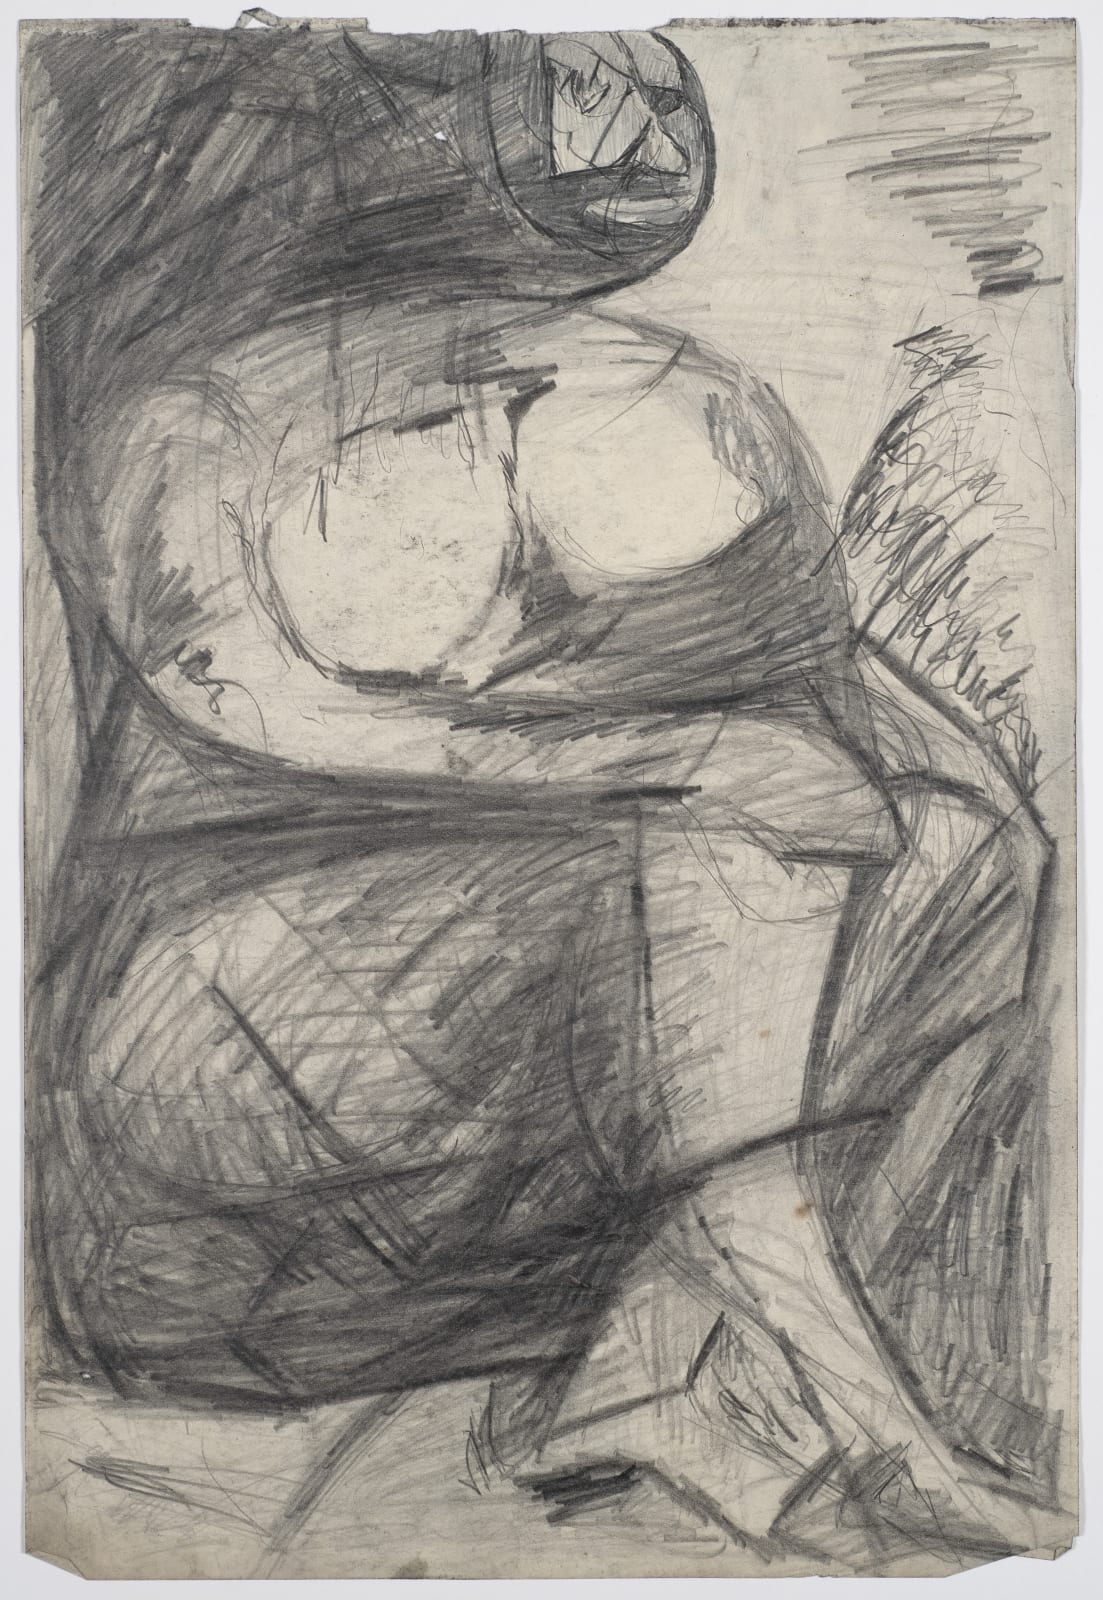 Untitled, c.1947 Crayon on paper 45 x 30.4cm The Gustav Metzger Foundation